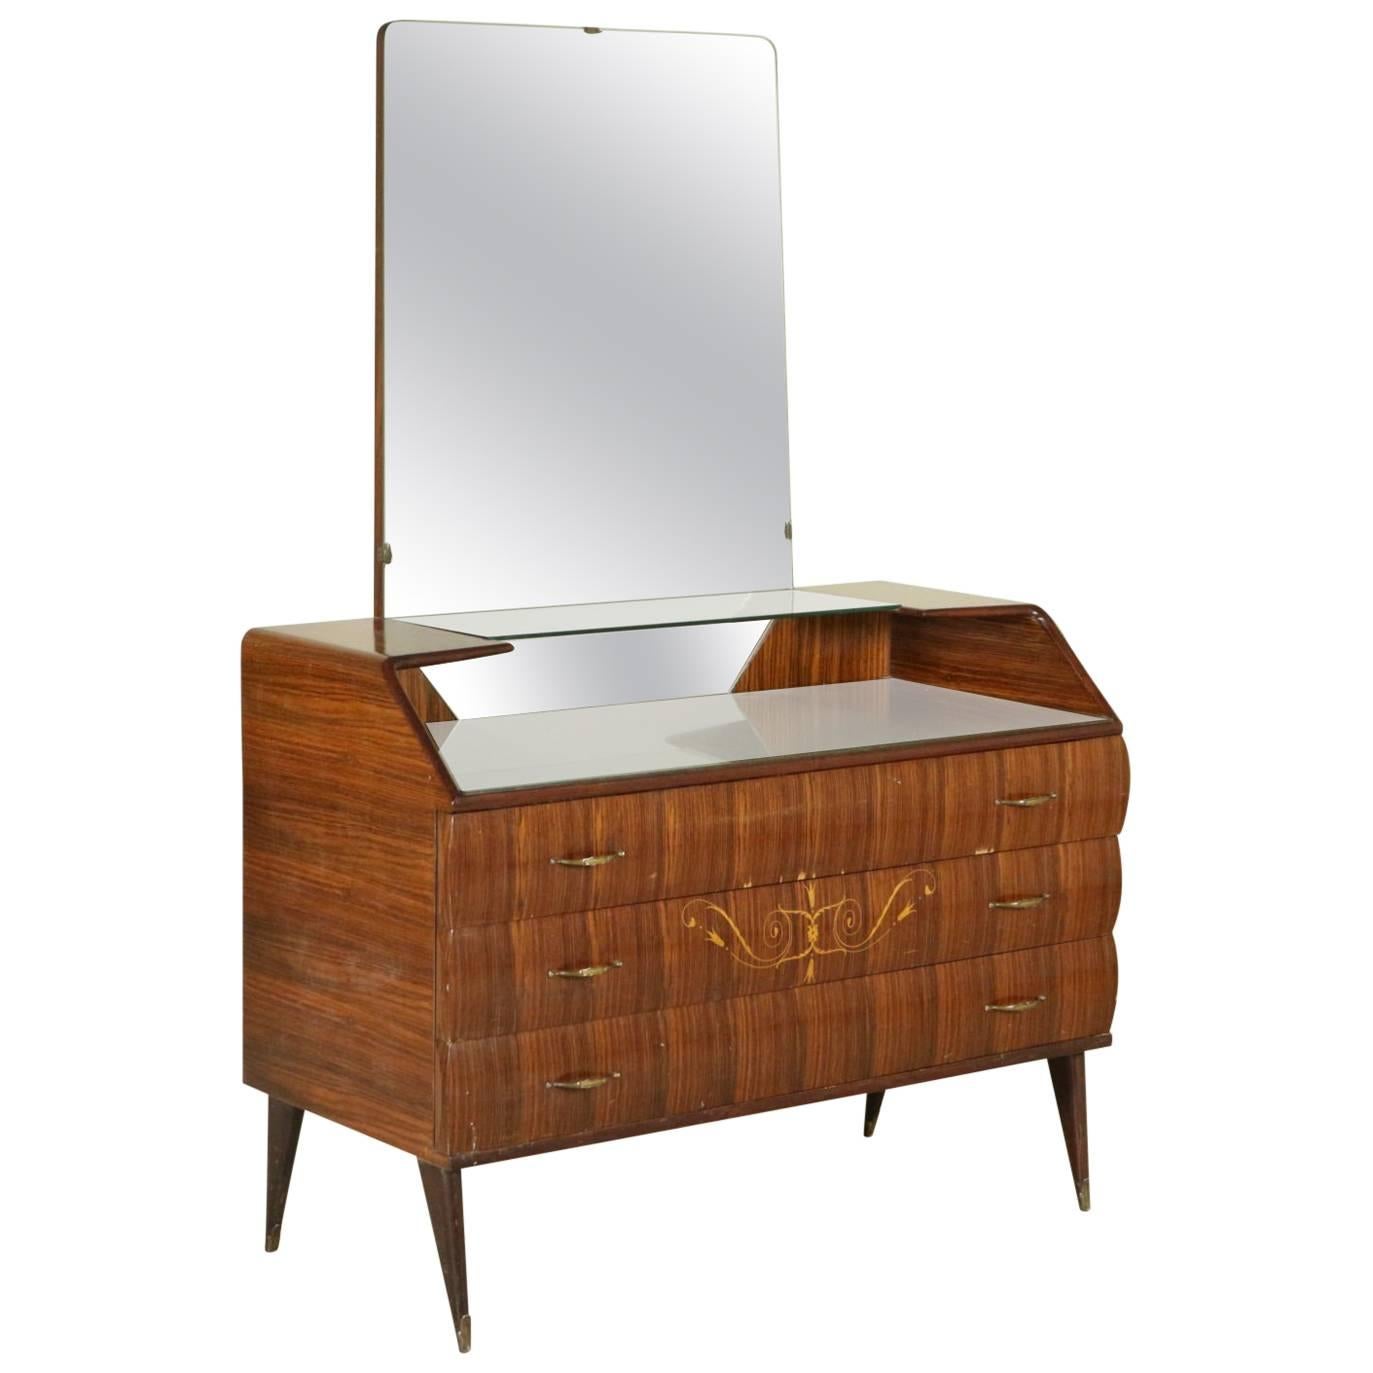 Chest of Drawers with Mirror, Rosewood Veneer, Inlaid Floral Decorations